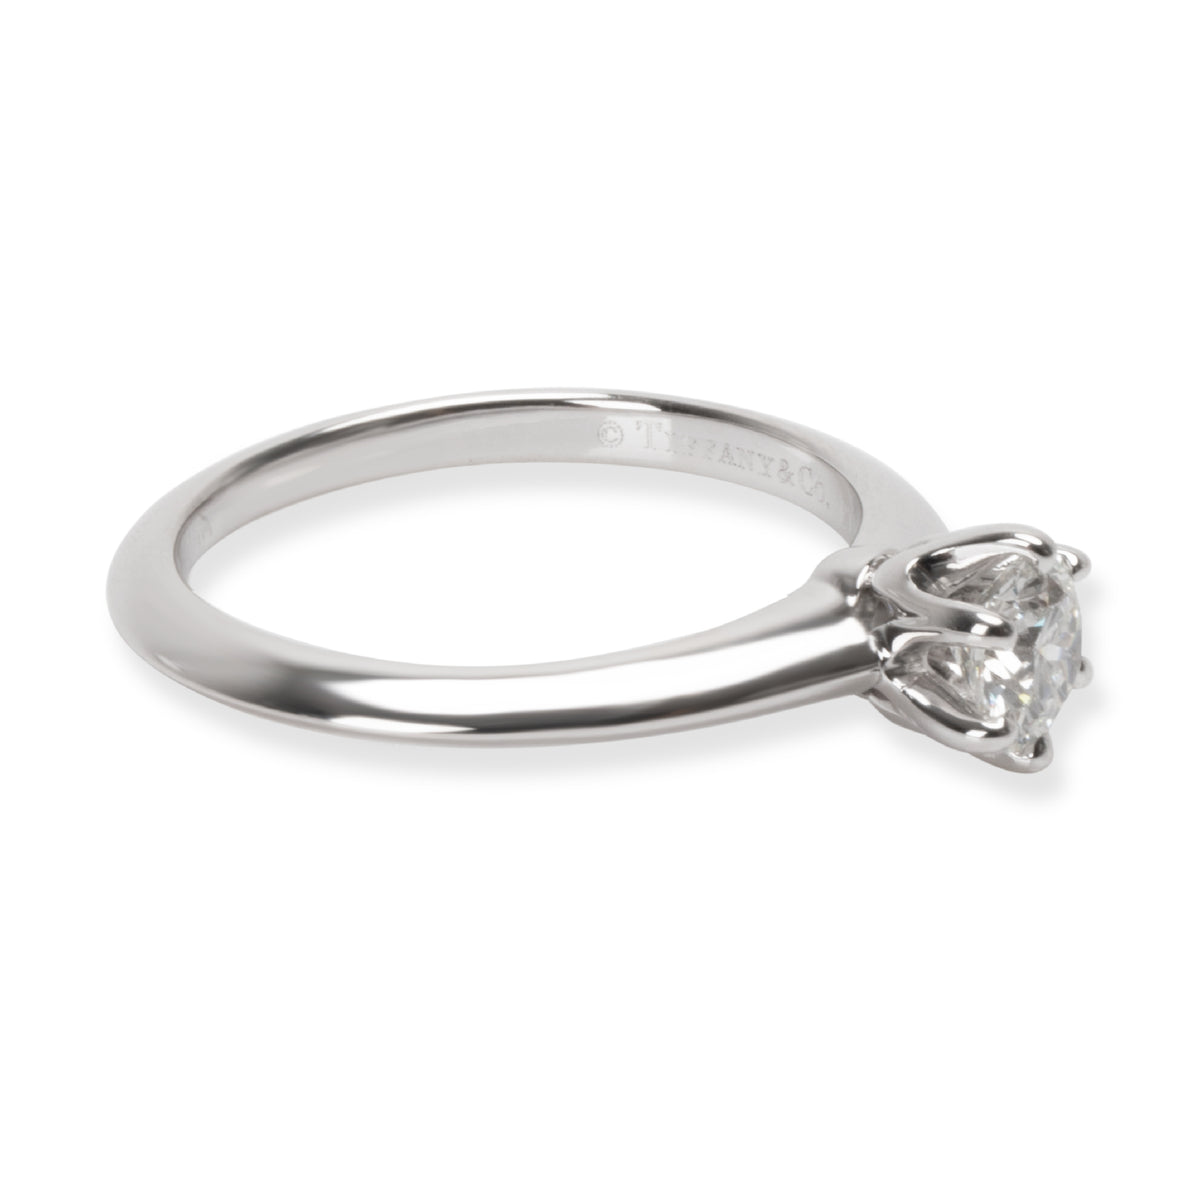 Tiffany & Co. Solitaire Diamond Engagement Ring in Platinum (0.39 ct G-H/VVS)